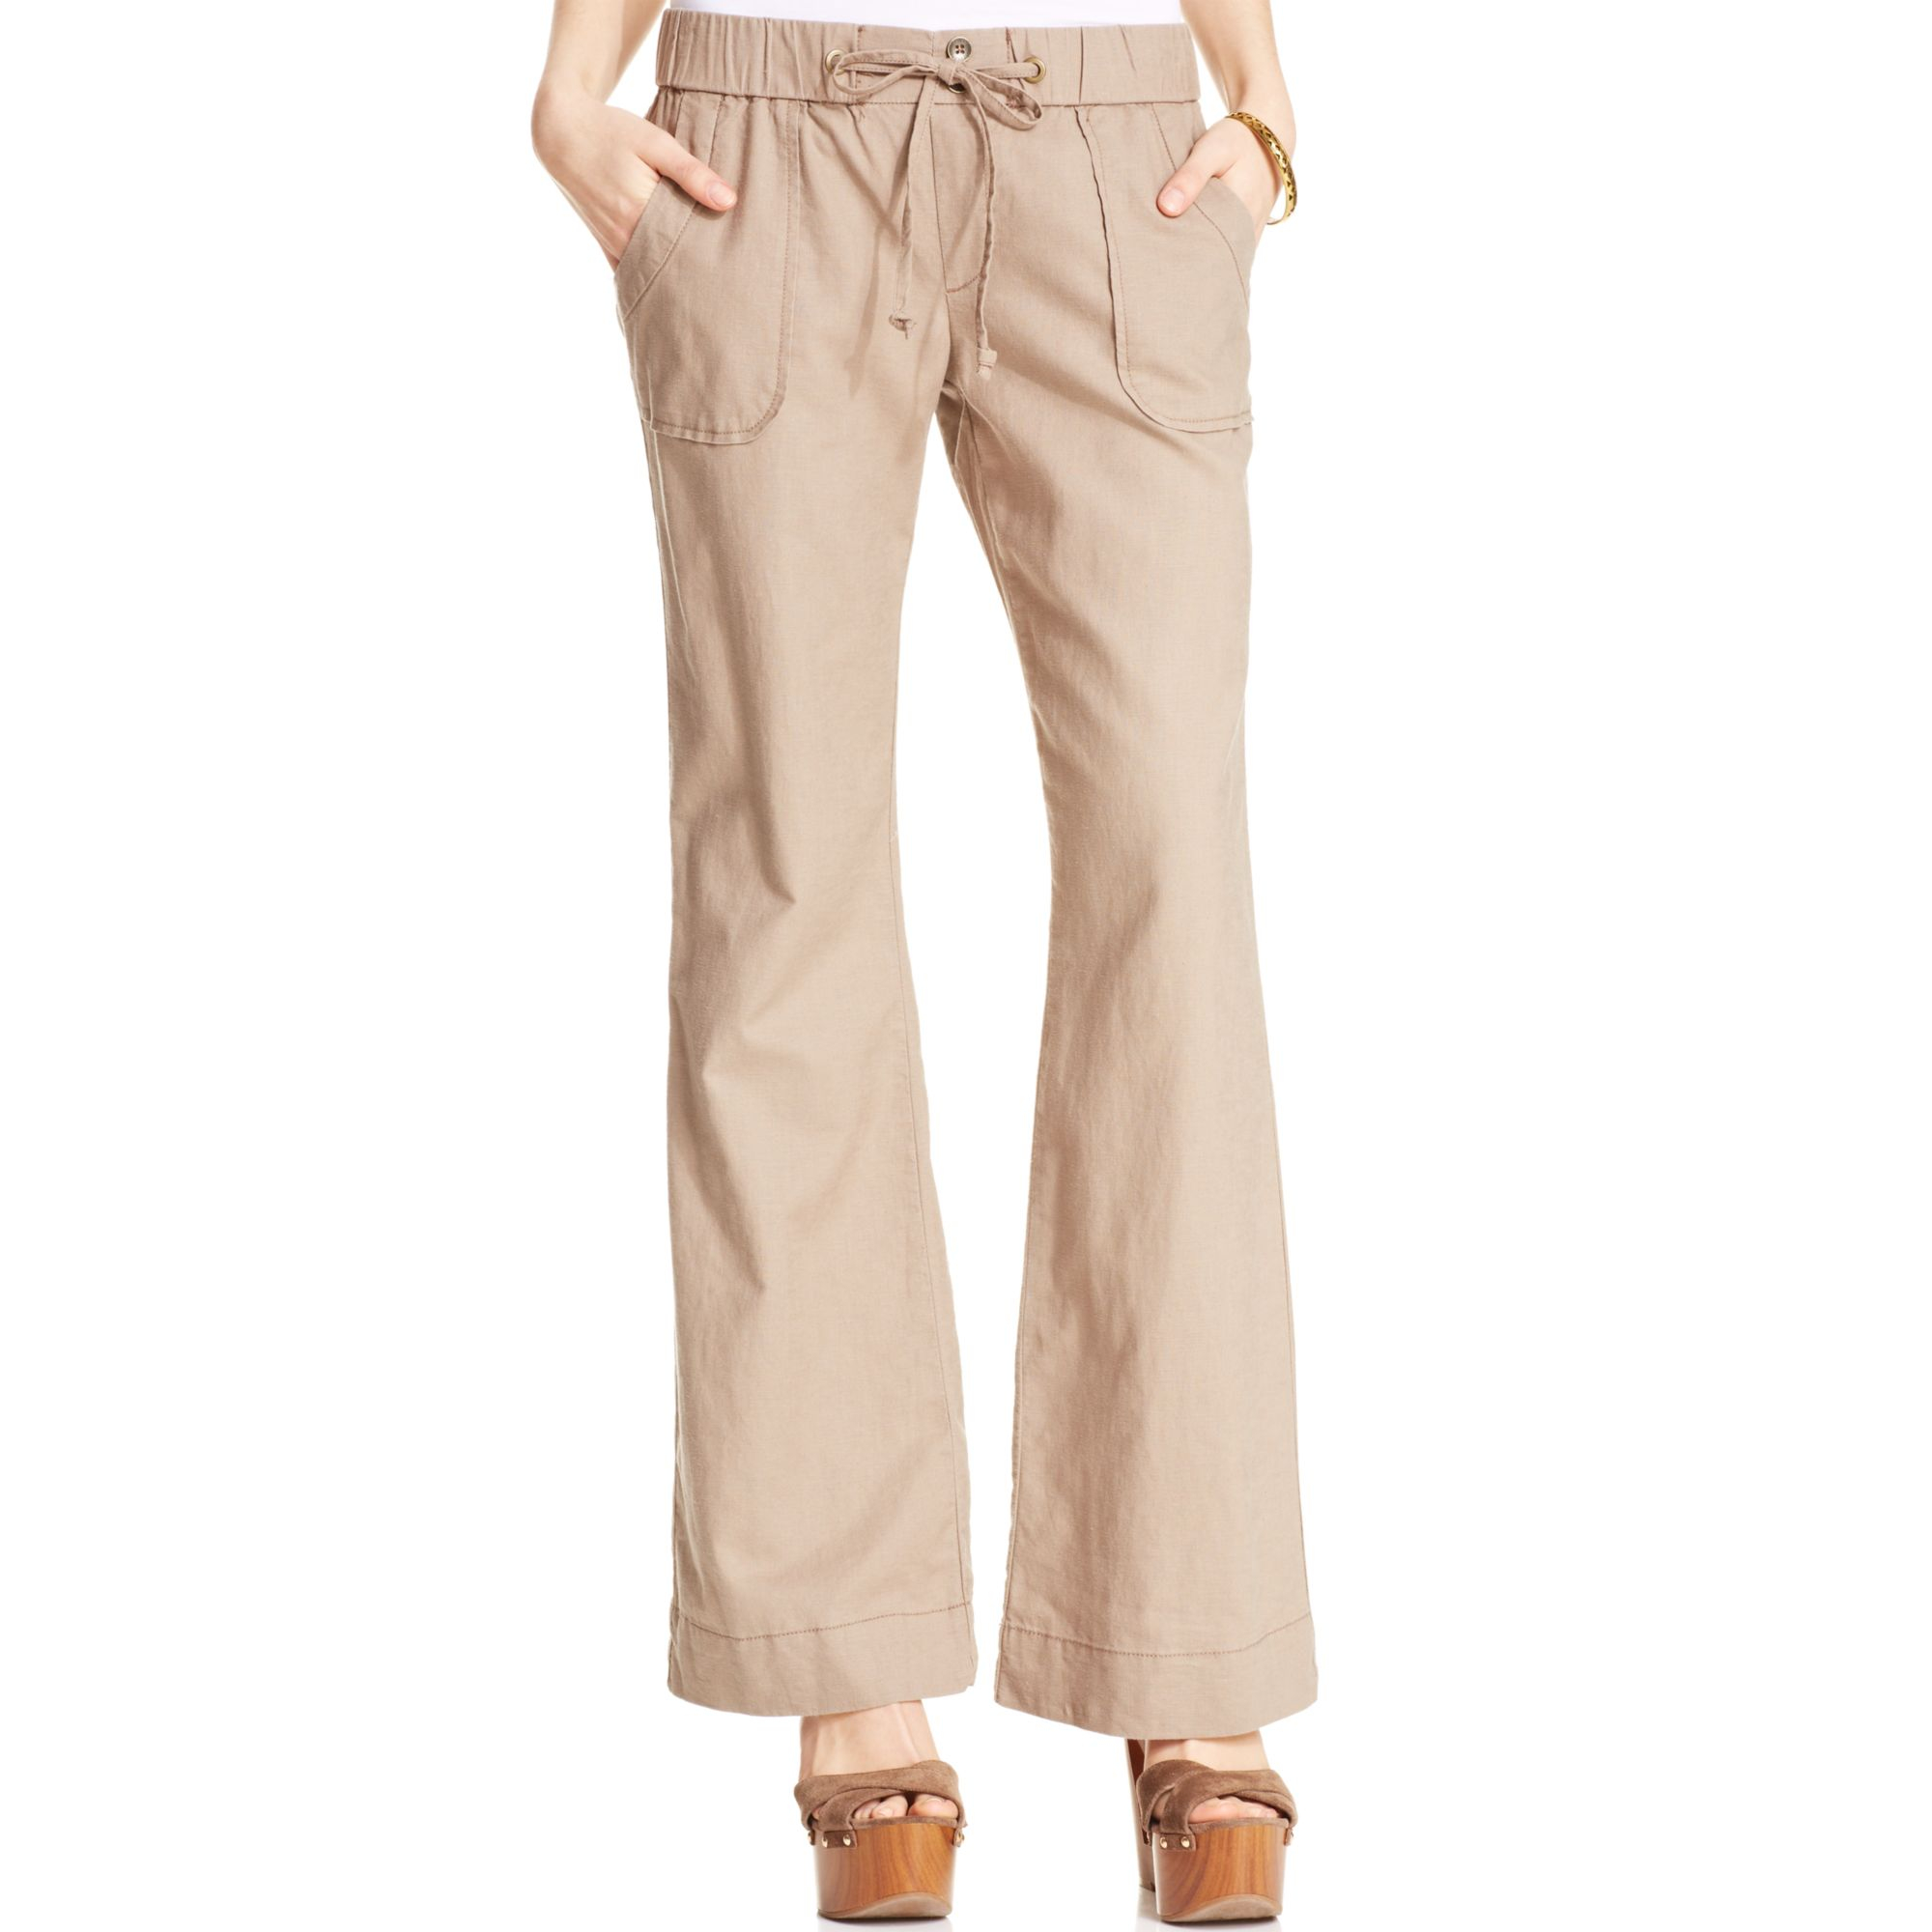 Jessica Simpson Cecil Beach Wideleg Pants in Beige (Taupe Grey) | Lyst